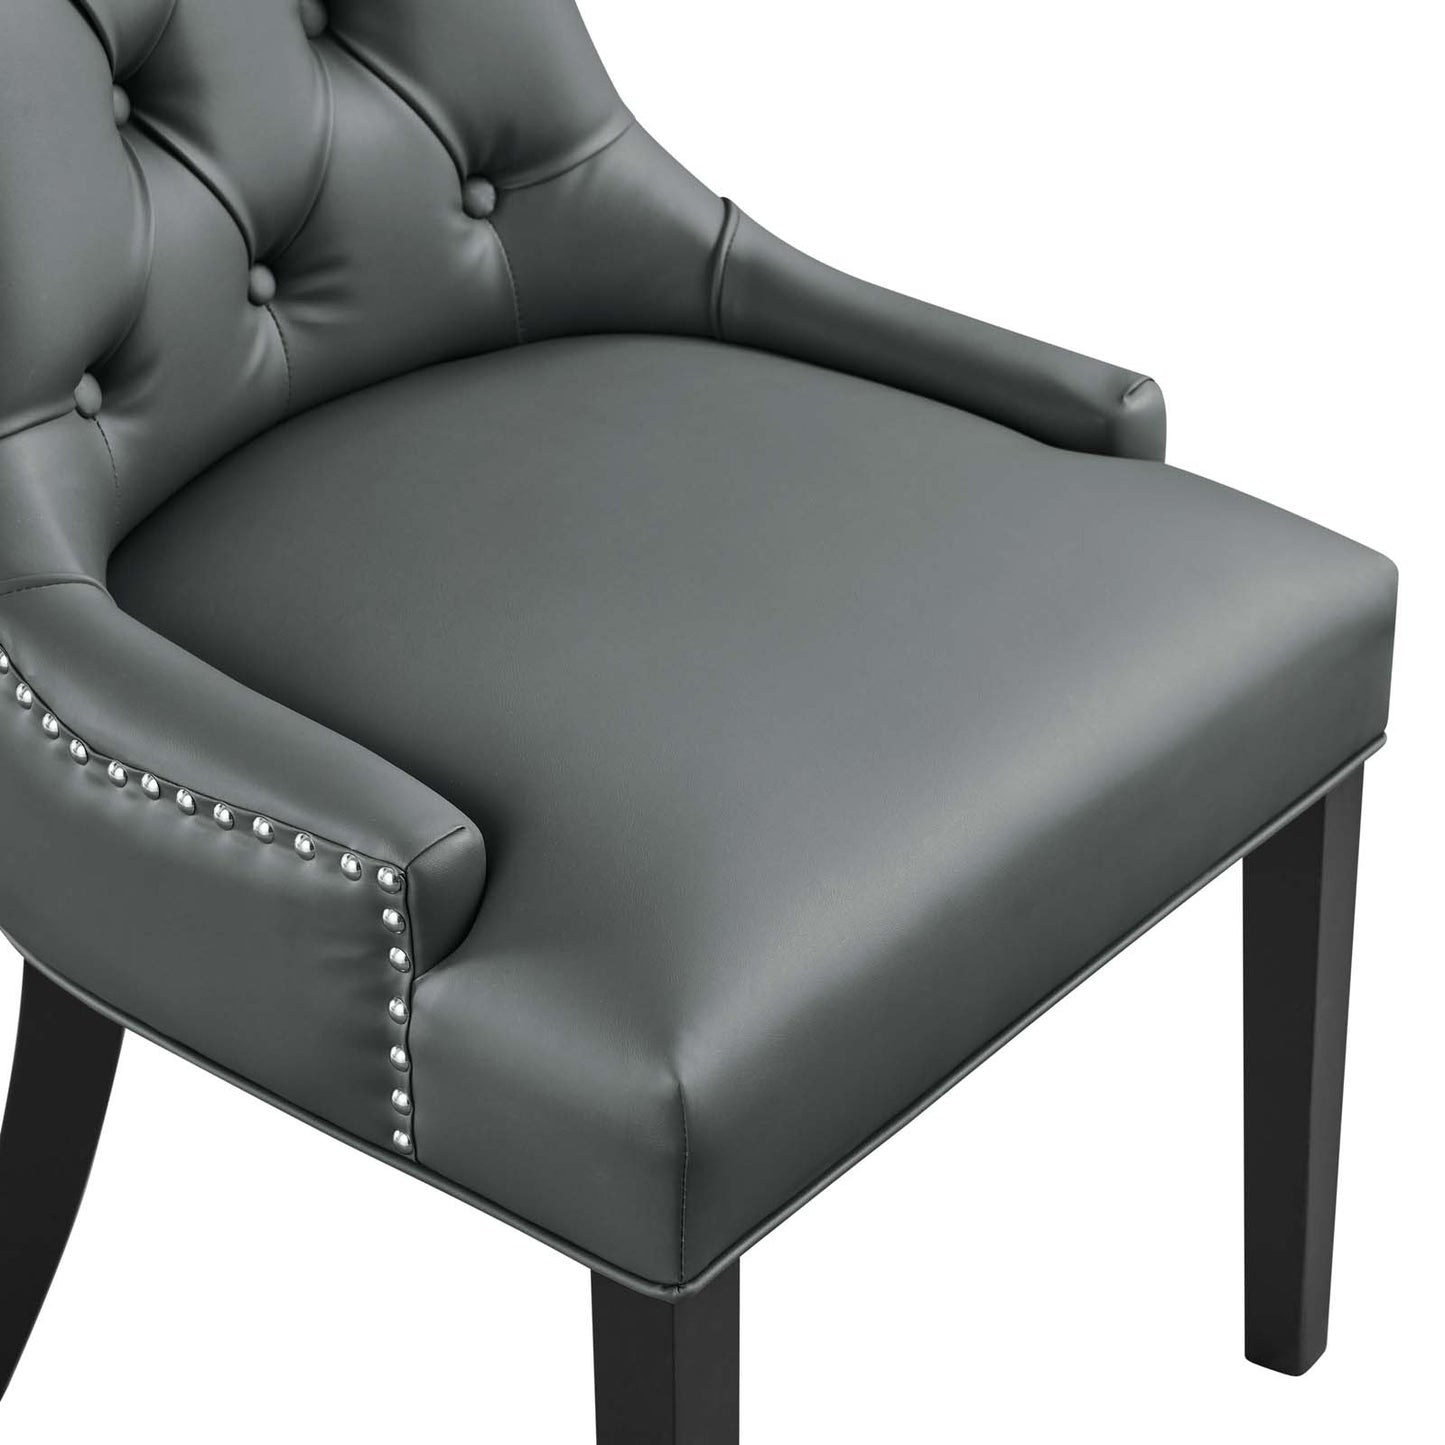 Regent Tufted Vegan Leather Dining Chair Gray EEI-2222-GRY